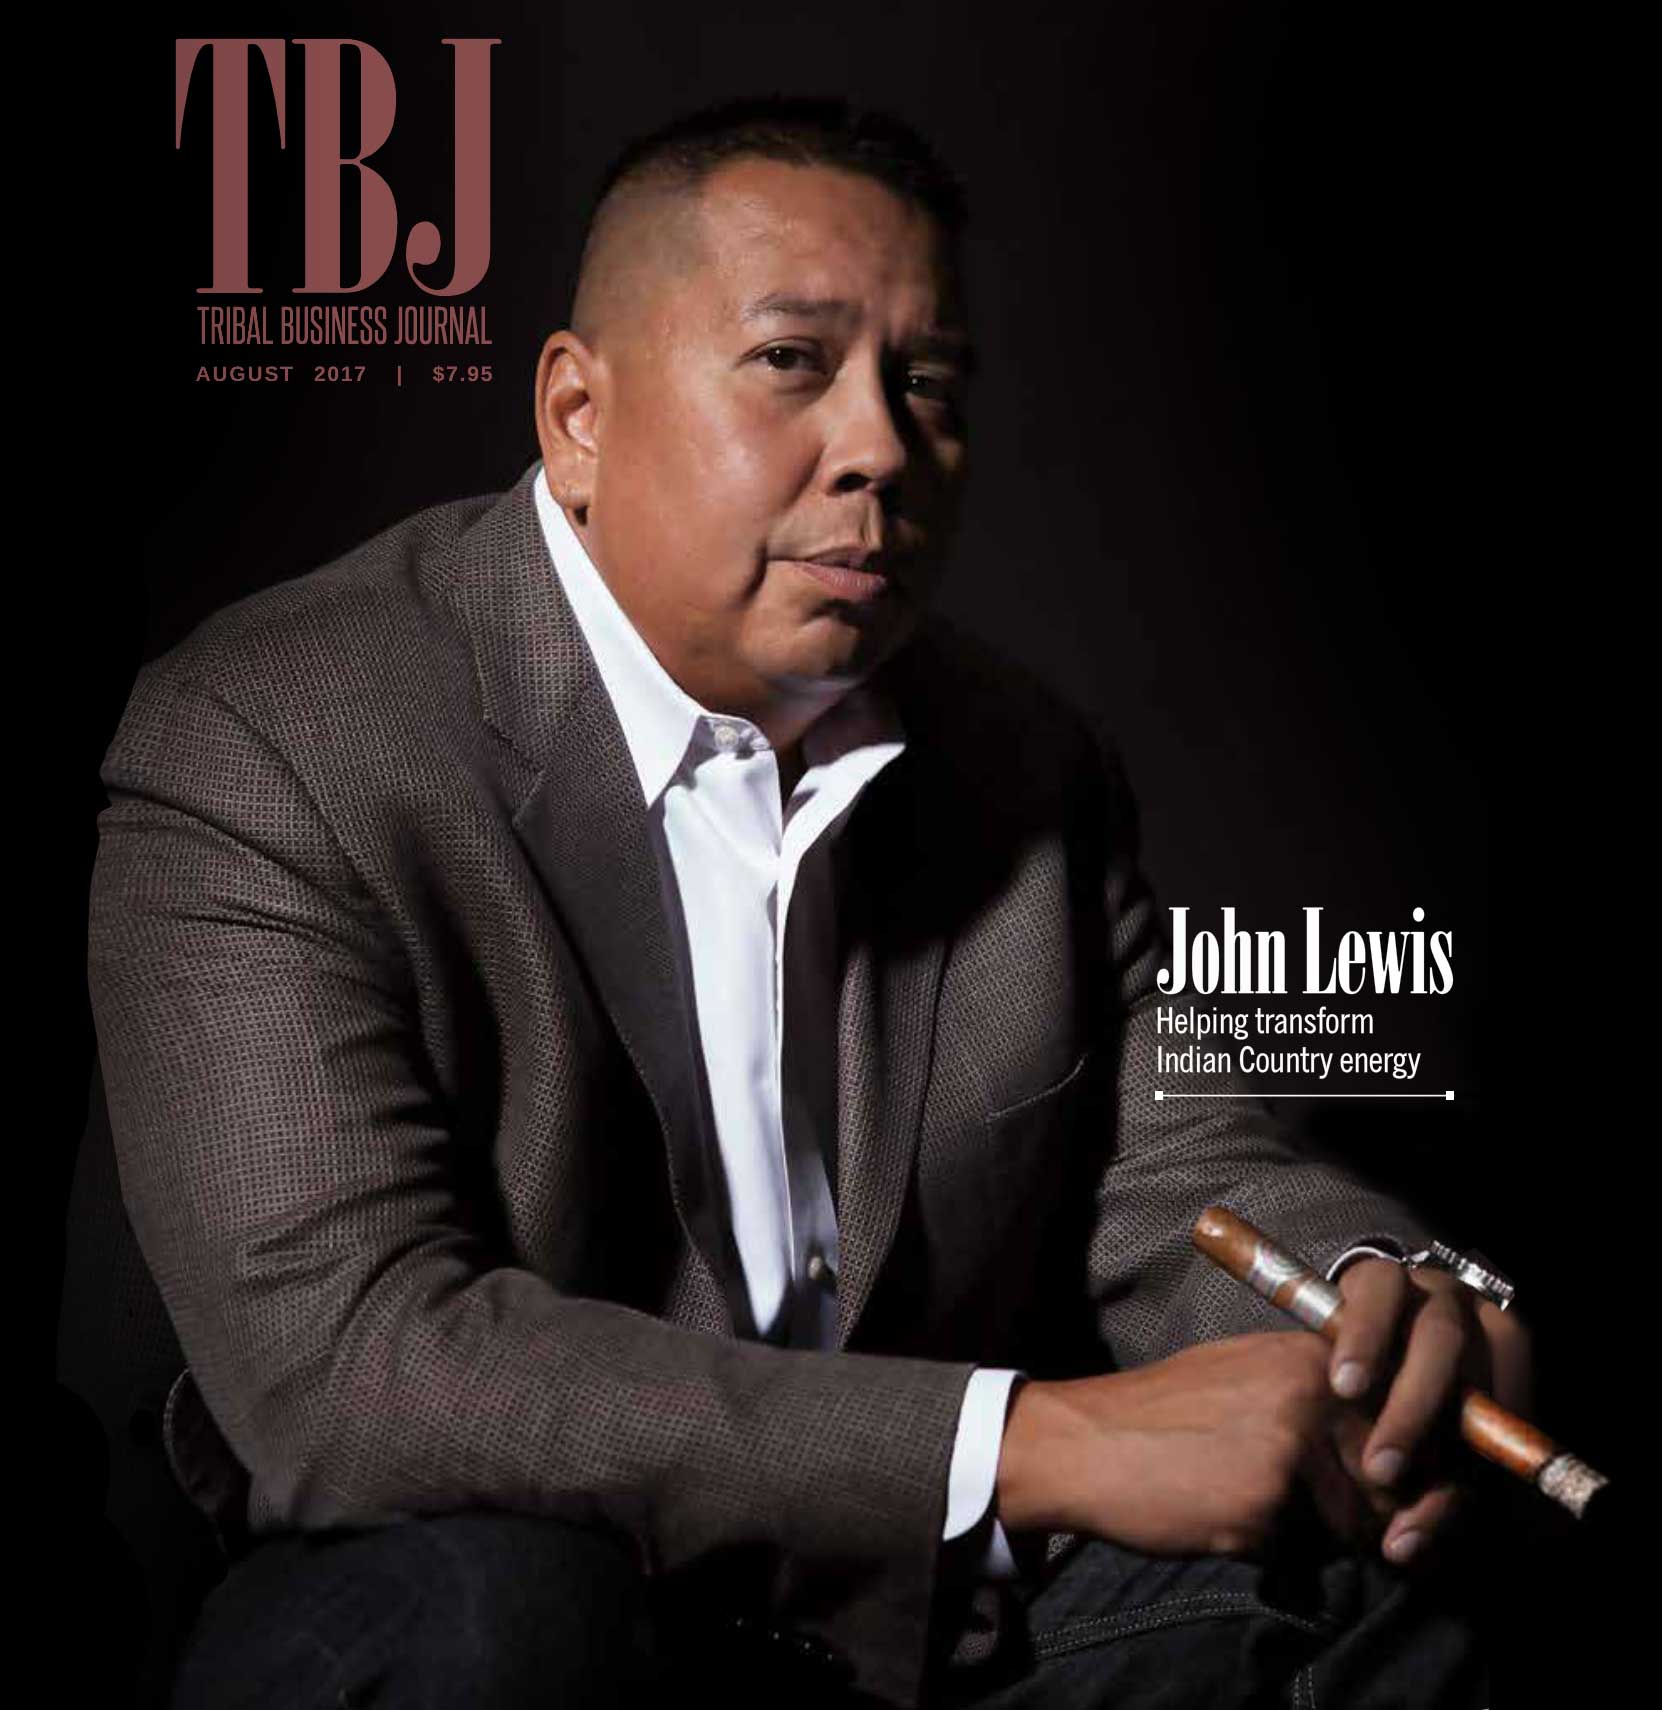 Tribal Business Journal cover featuring John Lewis 